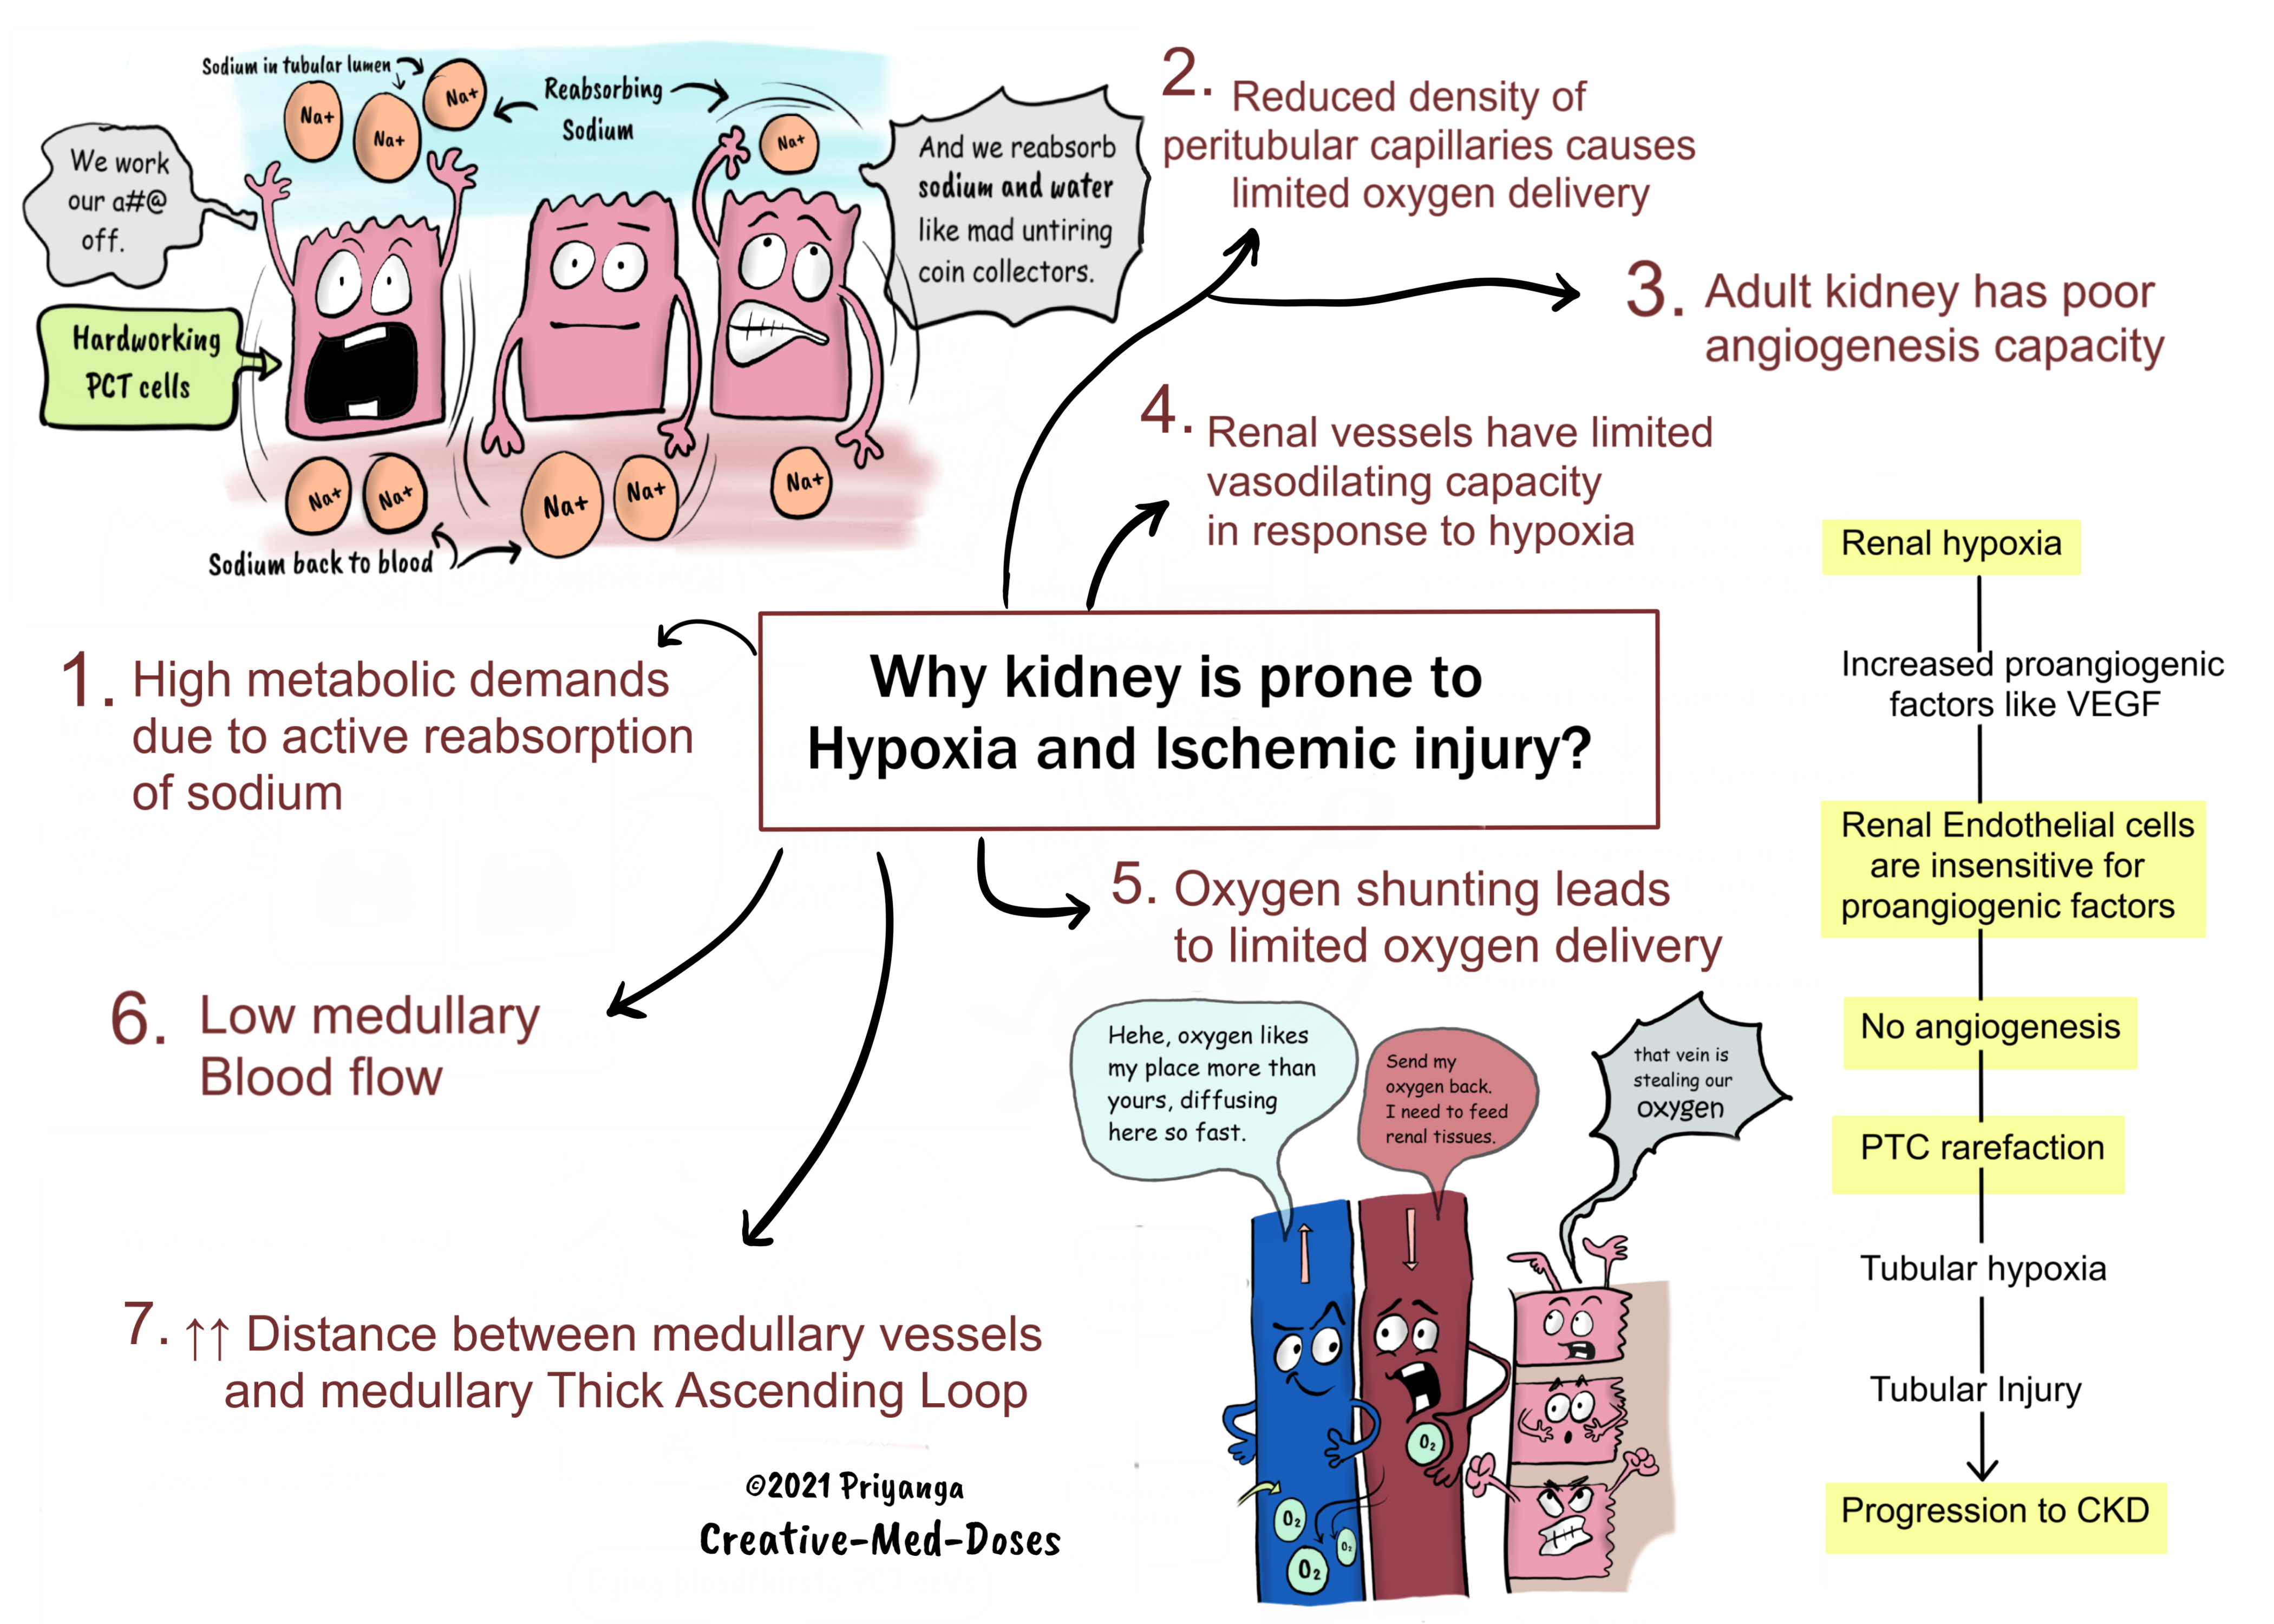 Renal Hypoxia: what makes kidney vulnerable to hypoxia 